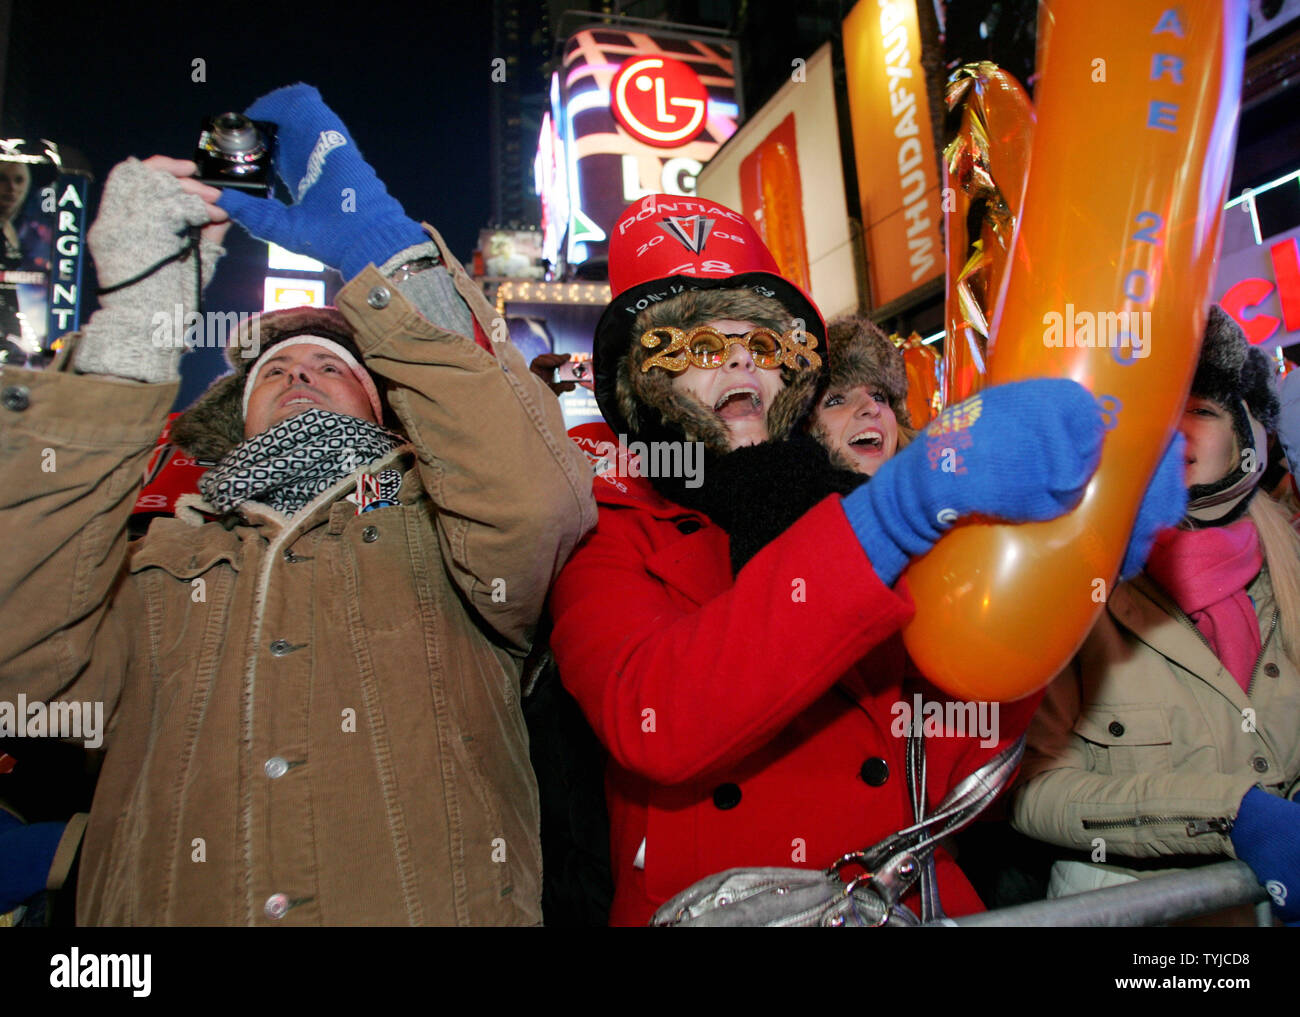 People celebrate the new year in Times Square where hundreds of thousands gathered for New Year's Eve on January 1, 2008 in New York. (UPI Photo/Monika Graff). Stock Photo